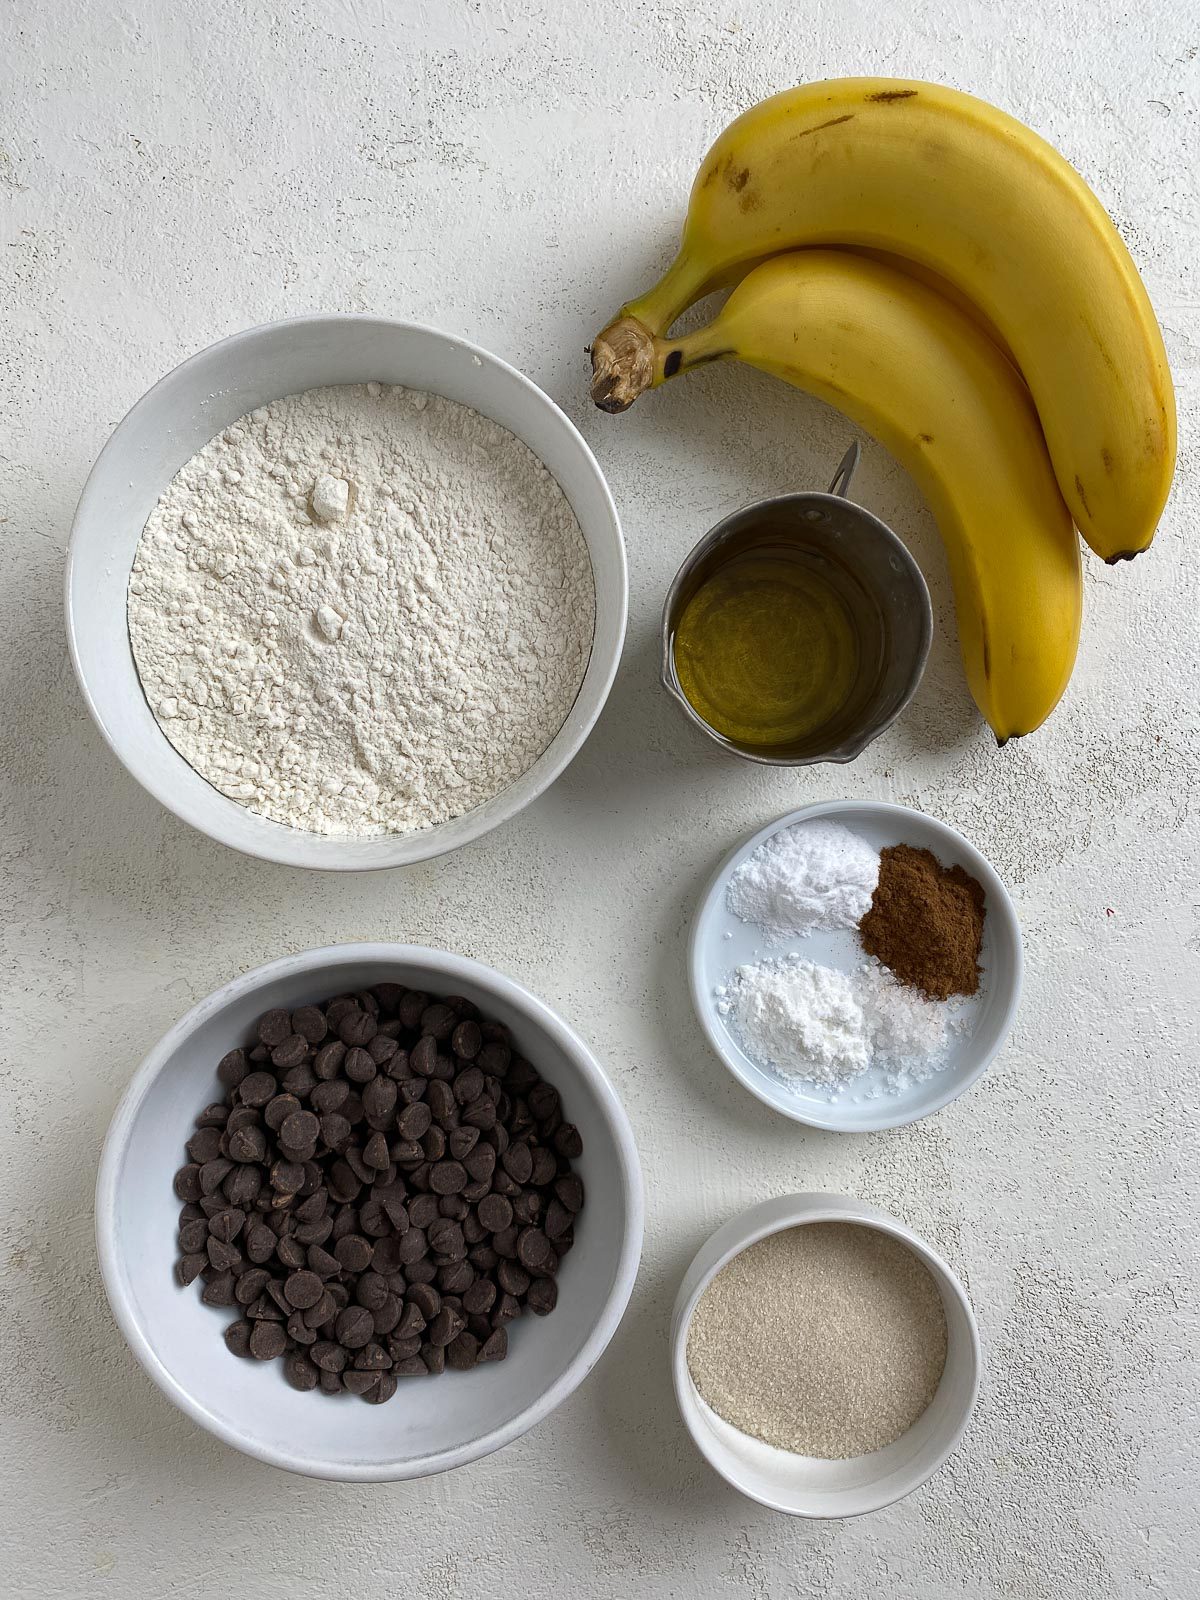 ingredients for Vegan Chocolate Chip Banana Muffins measured out in small white bowls